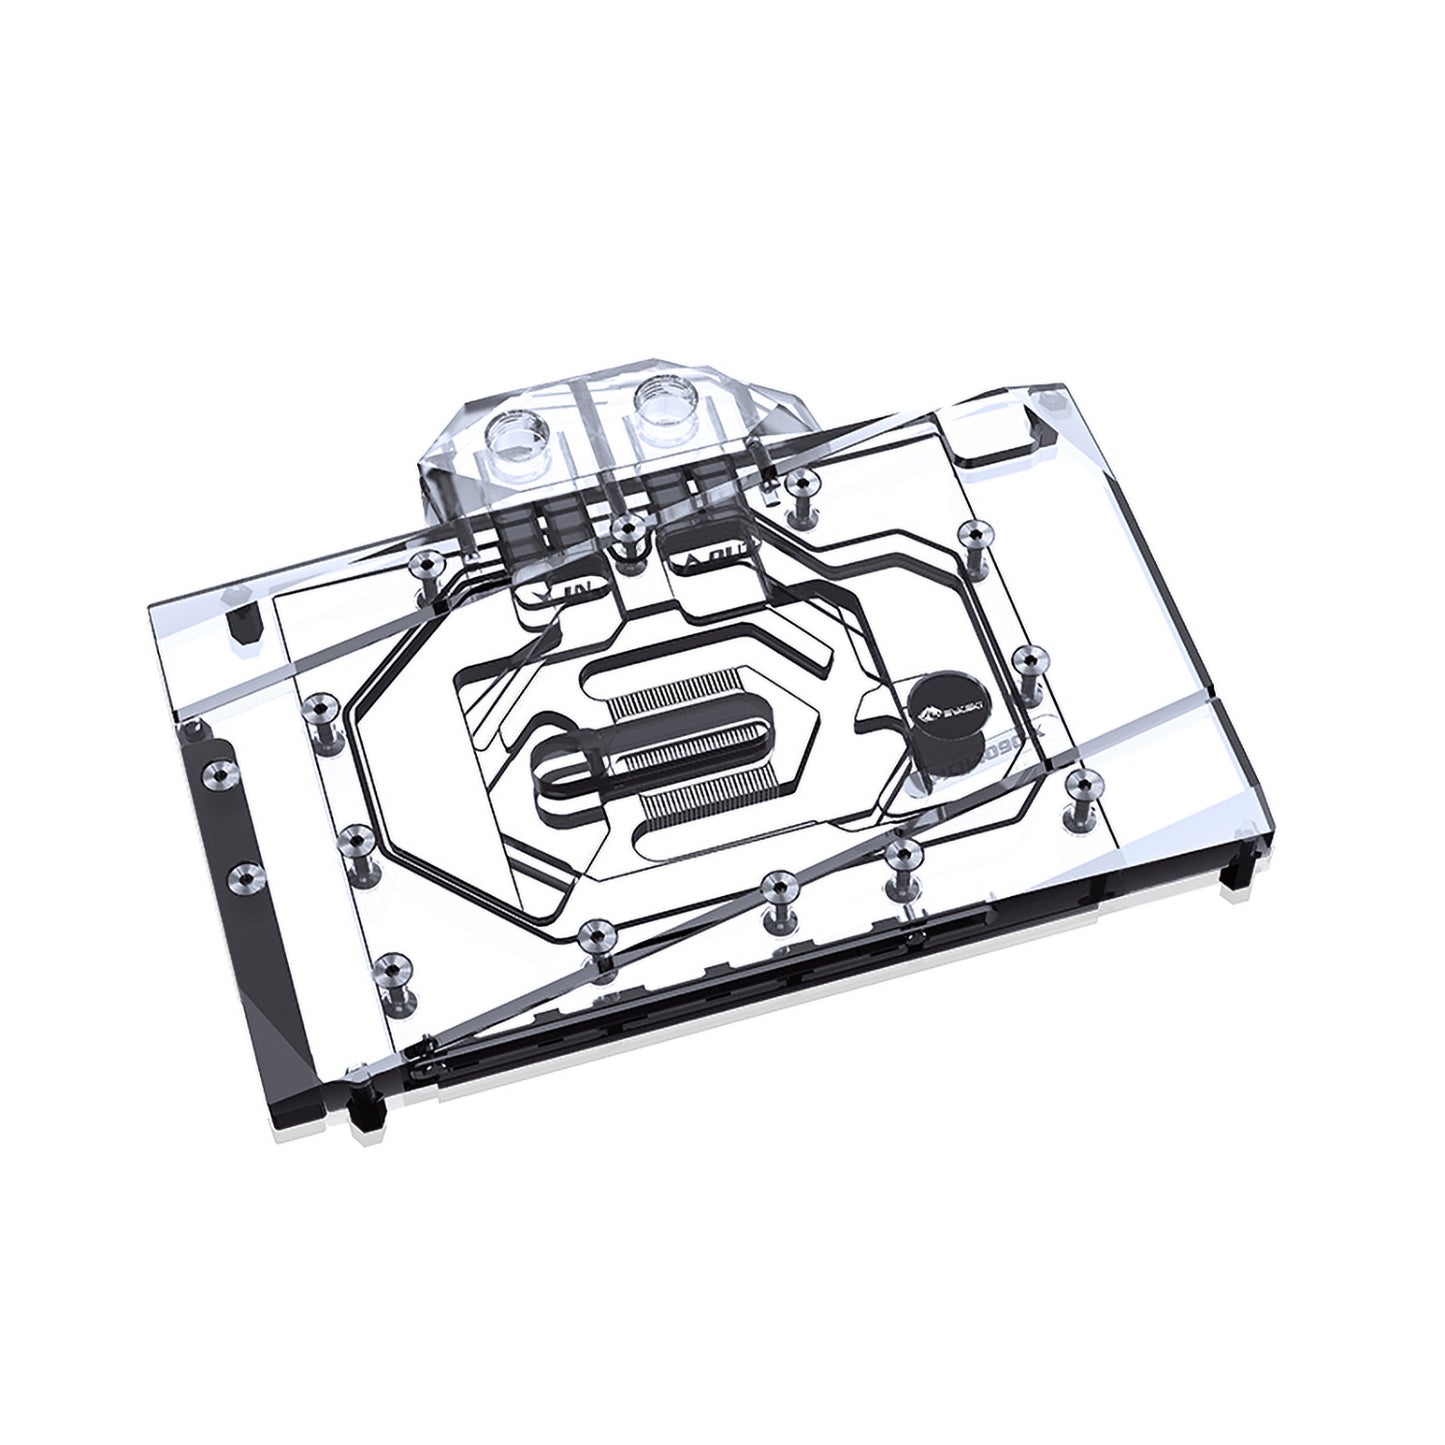 Bykski GPU Water Block For Inno3D RTX 4090 iCHILL Super Edition, Full Cover With Backplate PC Water Cooling Cooler, N-ICH4090-X